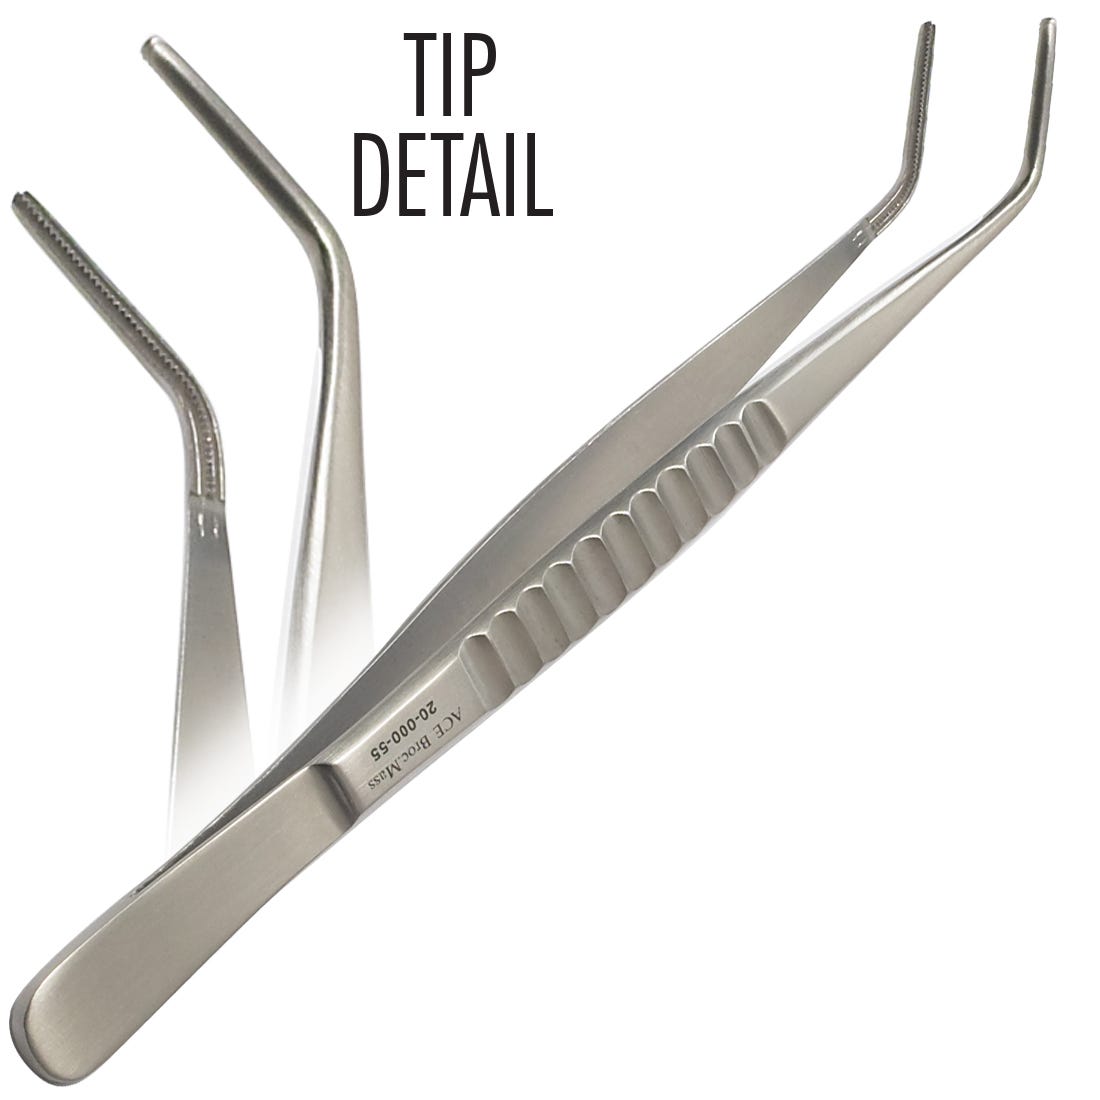 ACE DeBakey Tissue Forceps, 2mm wide tips, angled